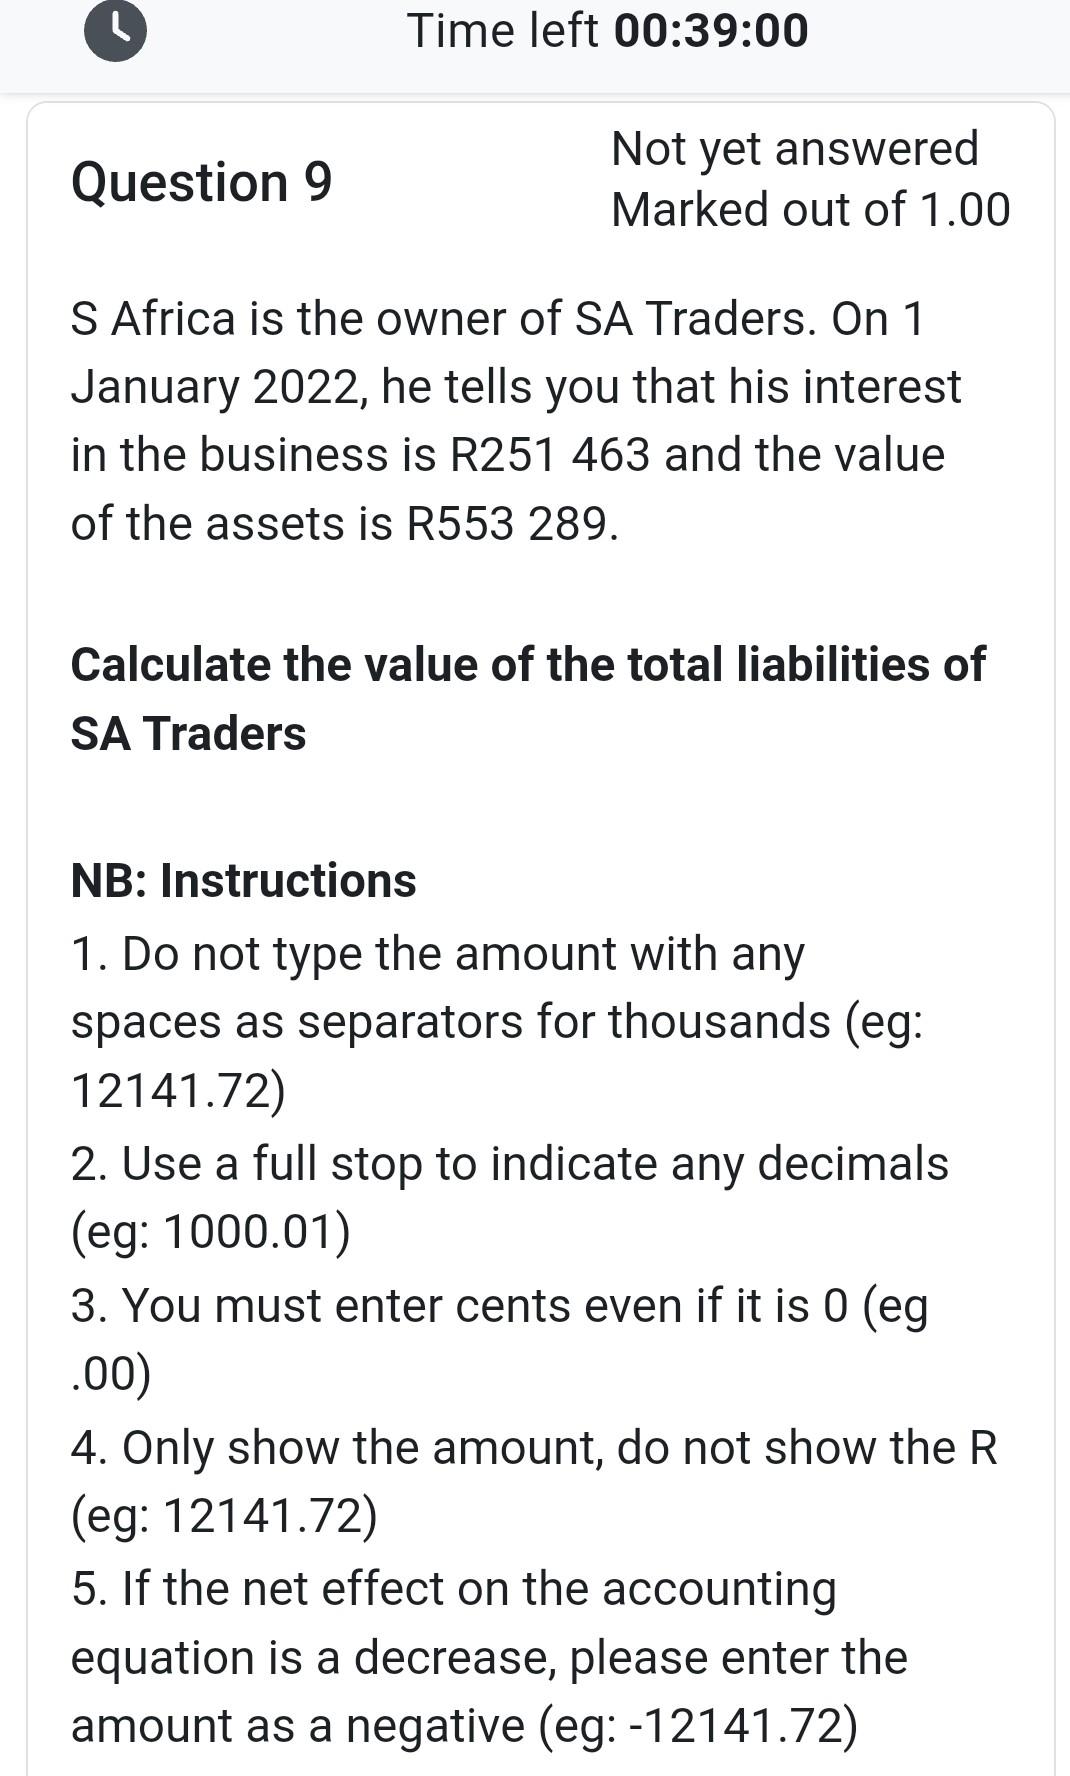 Question 9 Time left 00:39:00 Not yet answered Marked out of 1.00 S Africa is the owner of SA Traders. On 1